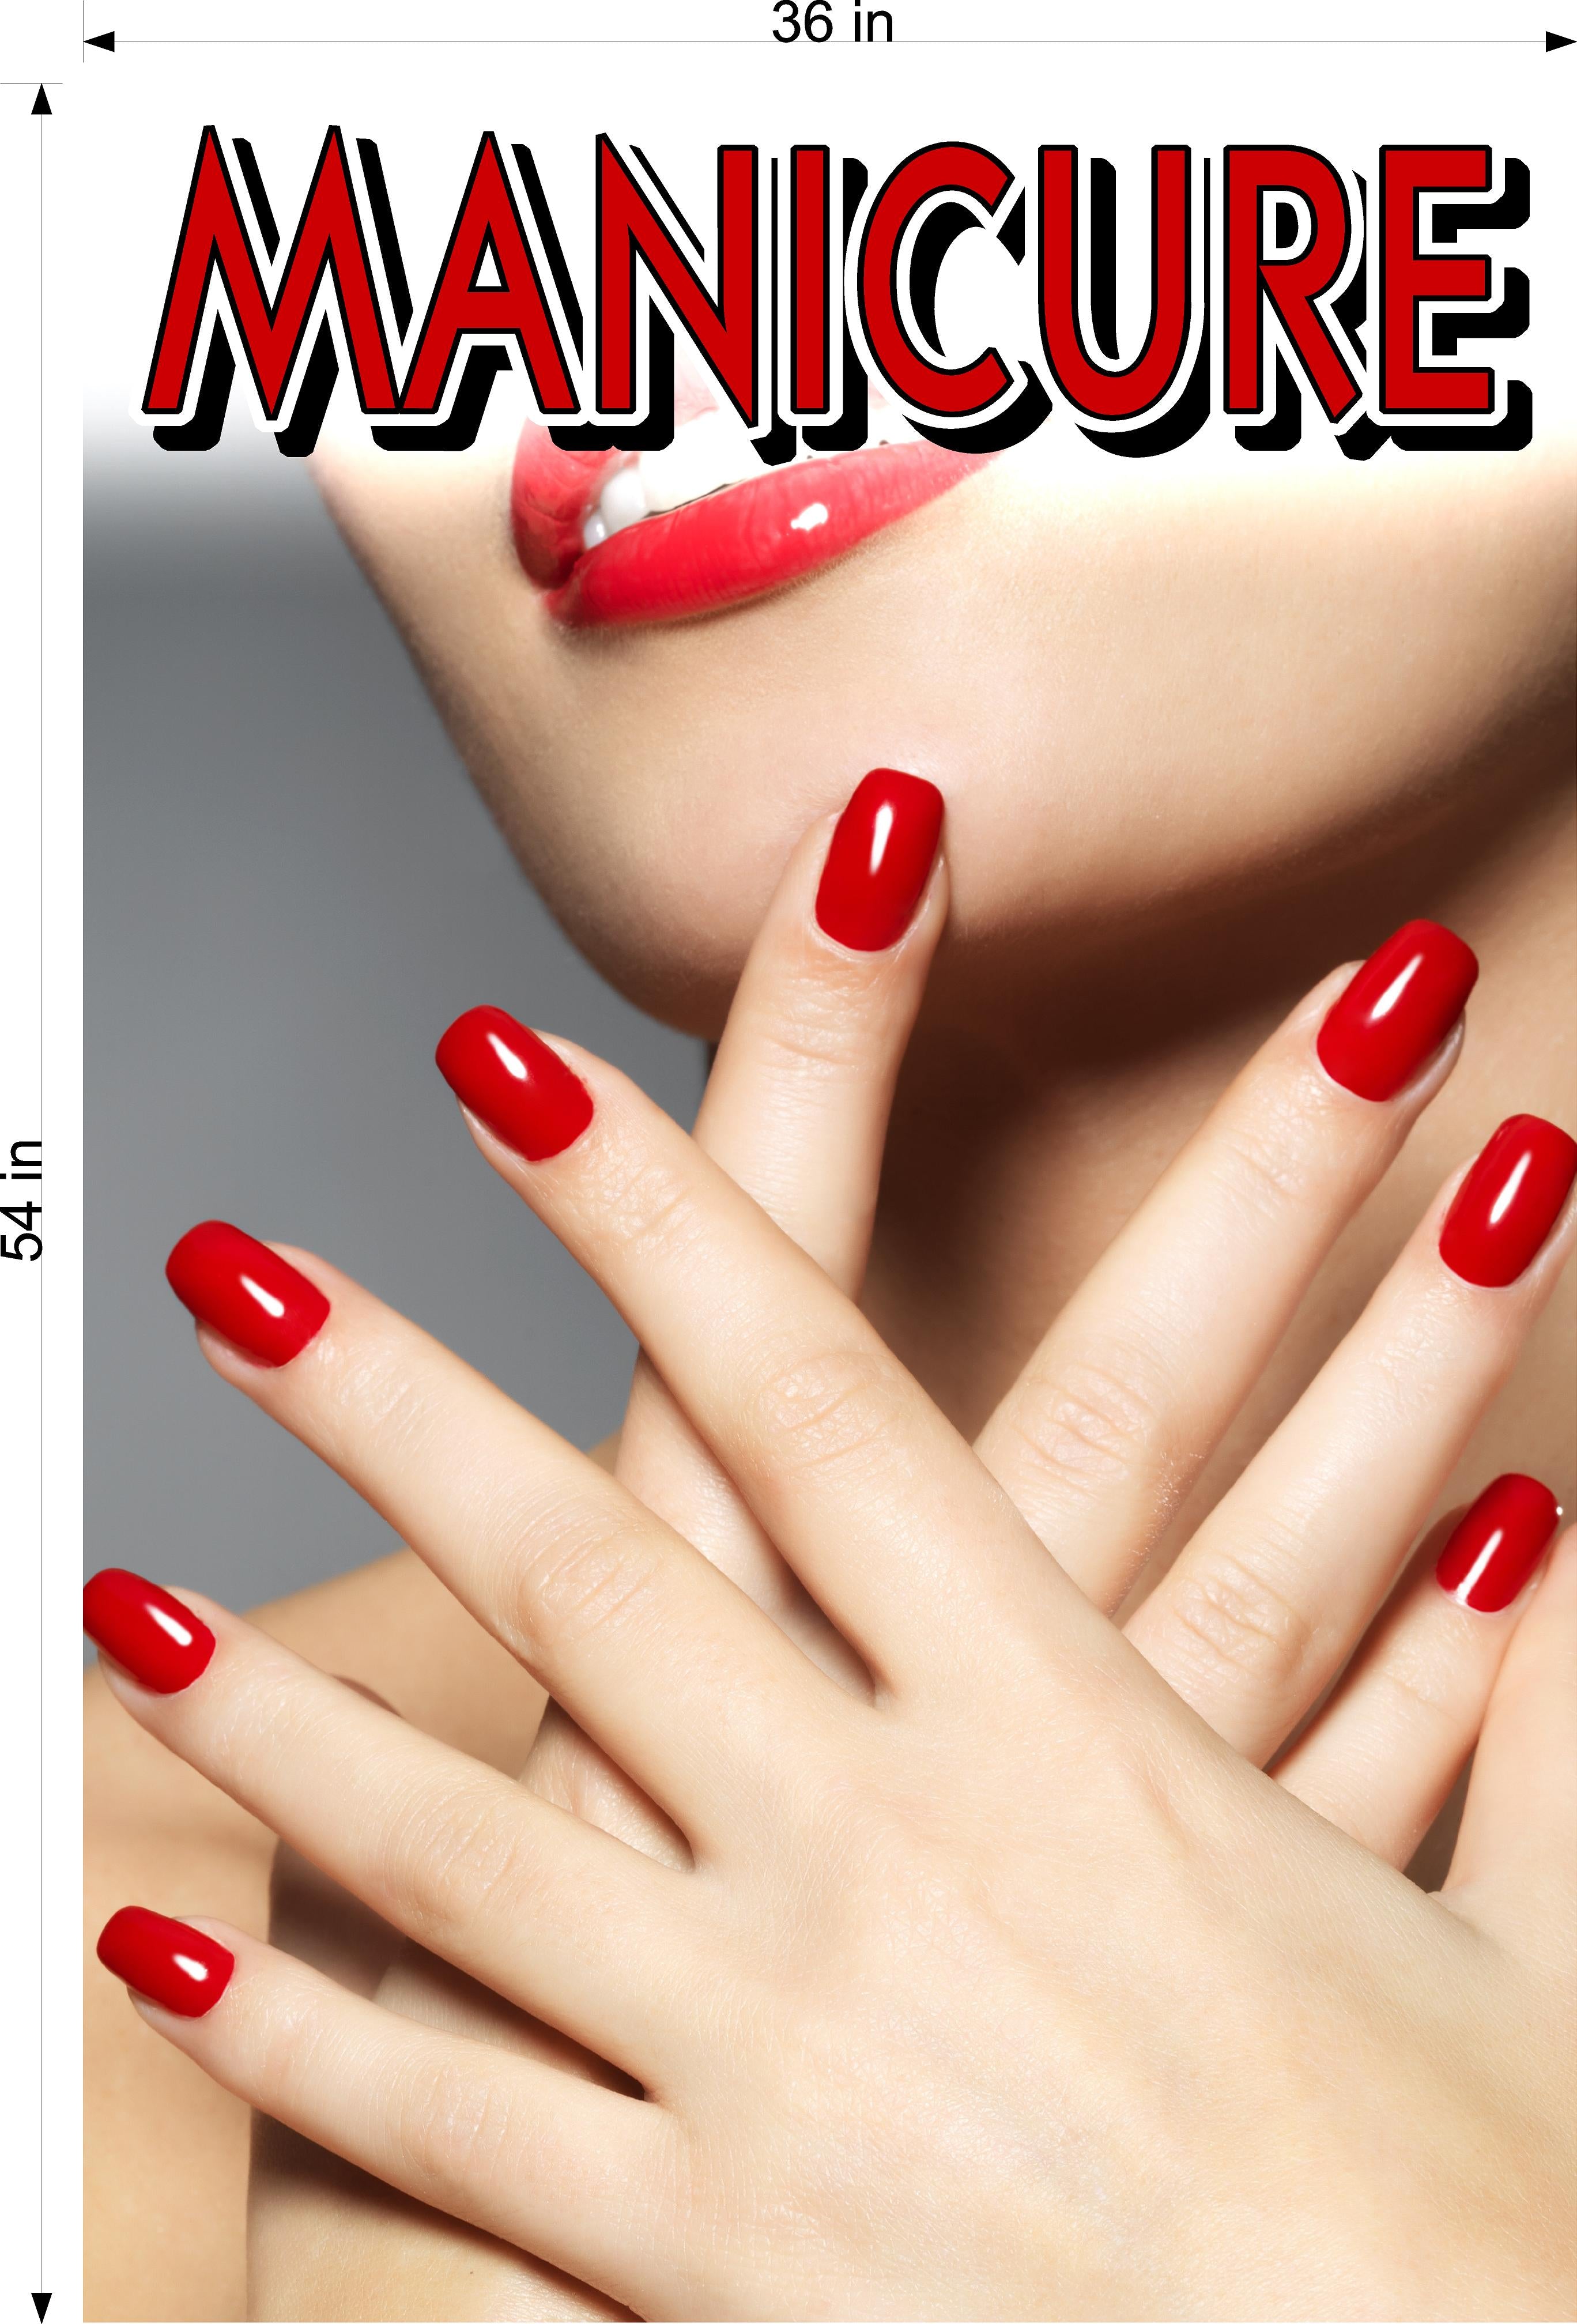 Manicure 07 Perforated Mesh One Way Vision See-Through Window Vinyl Nail Salon Sign Vertical